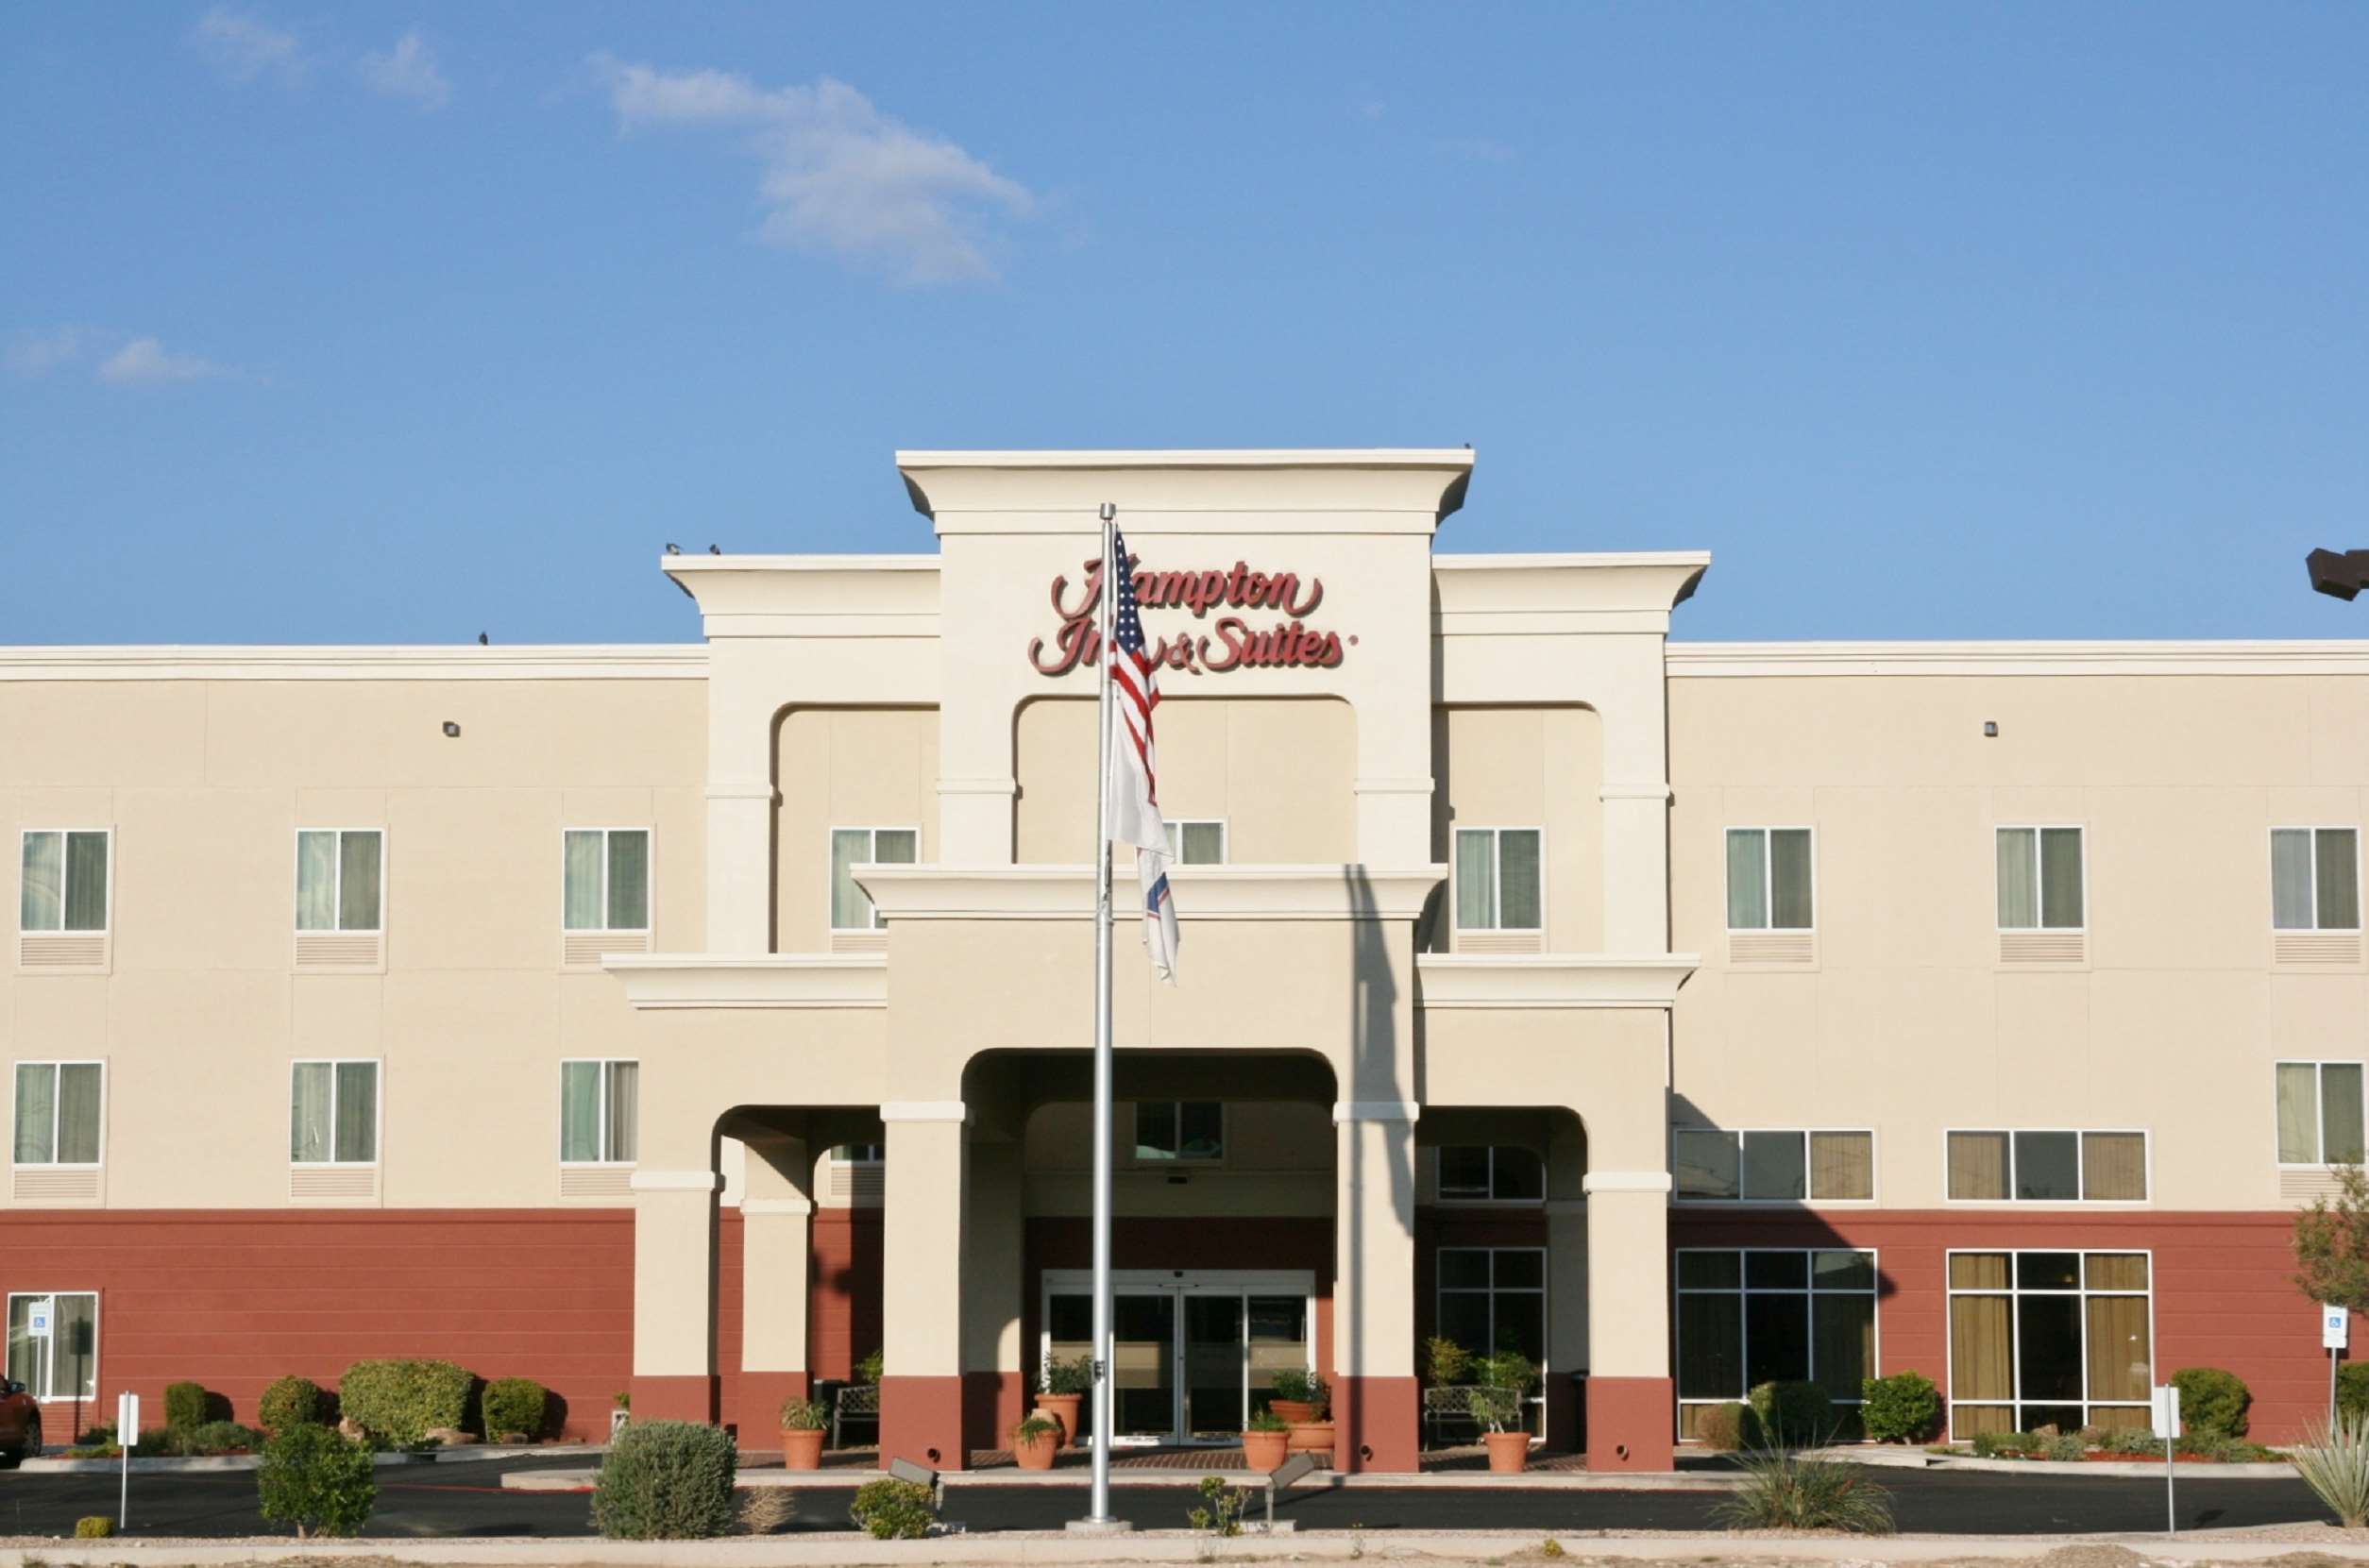 Get directions, reviews and information for Hampton Inn & Suites Ho...